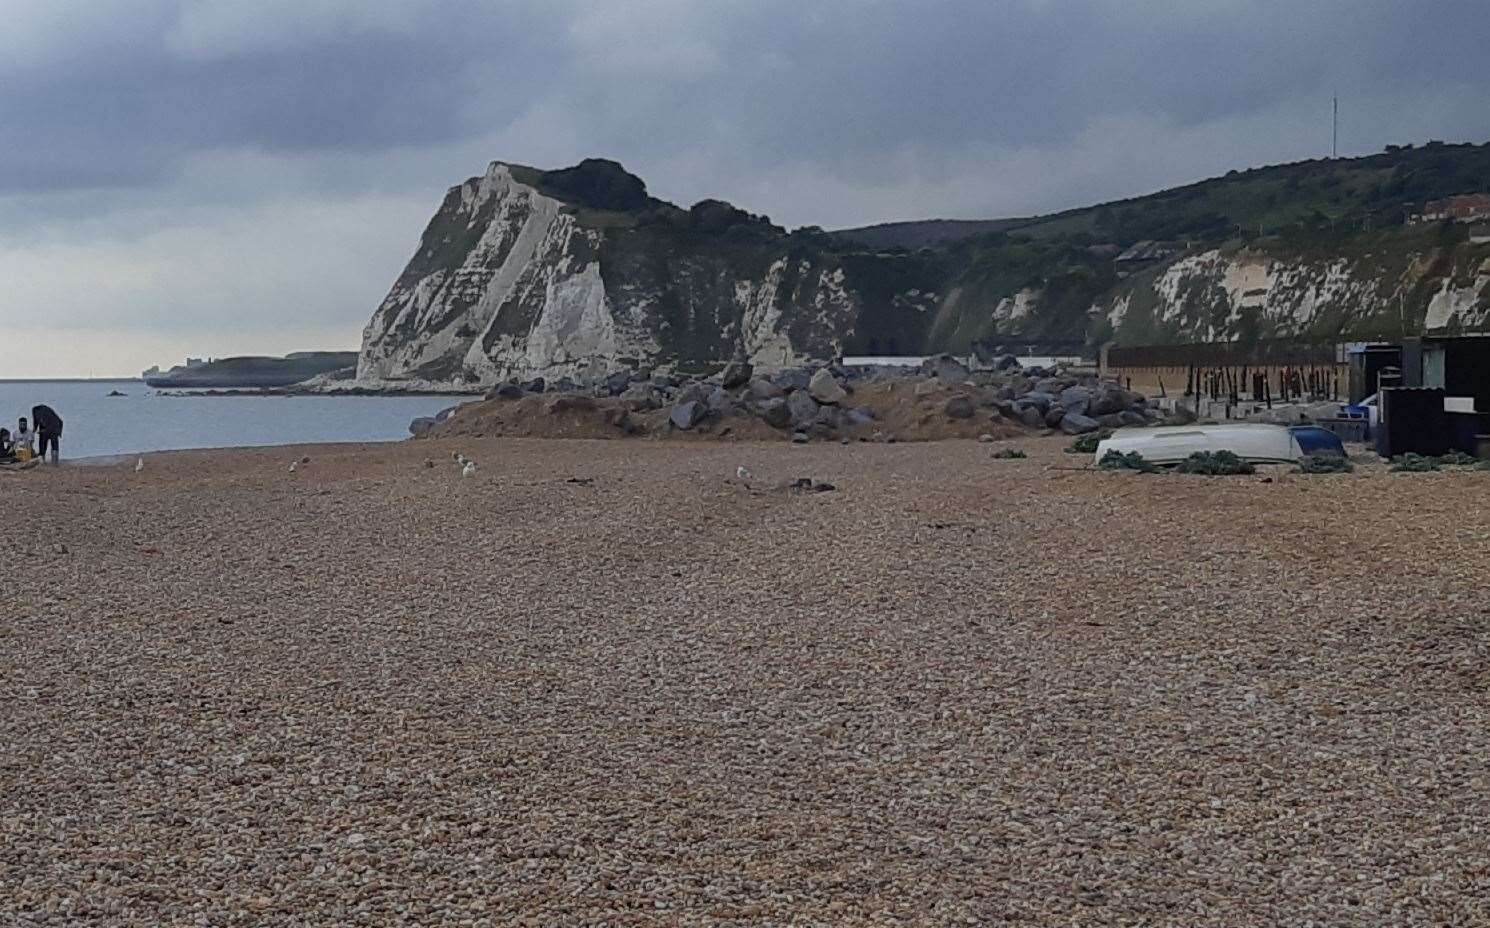 Shakespeare Beach, where the asylum seeker is thought to have landed